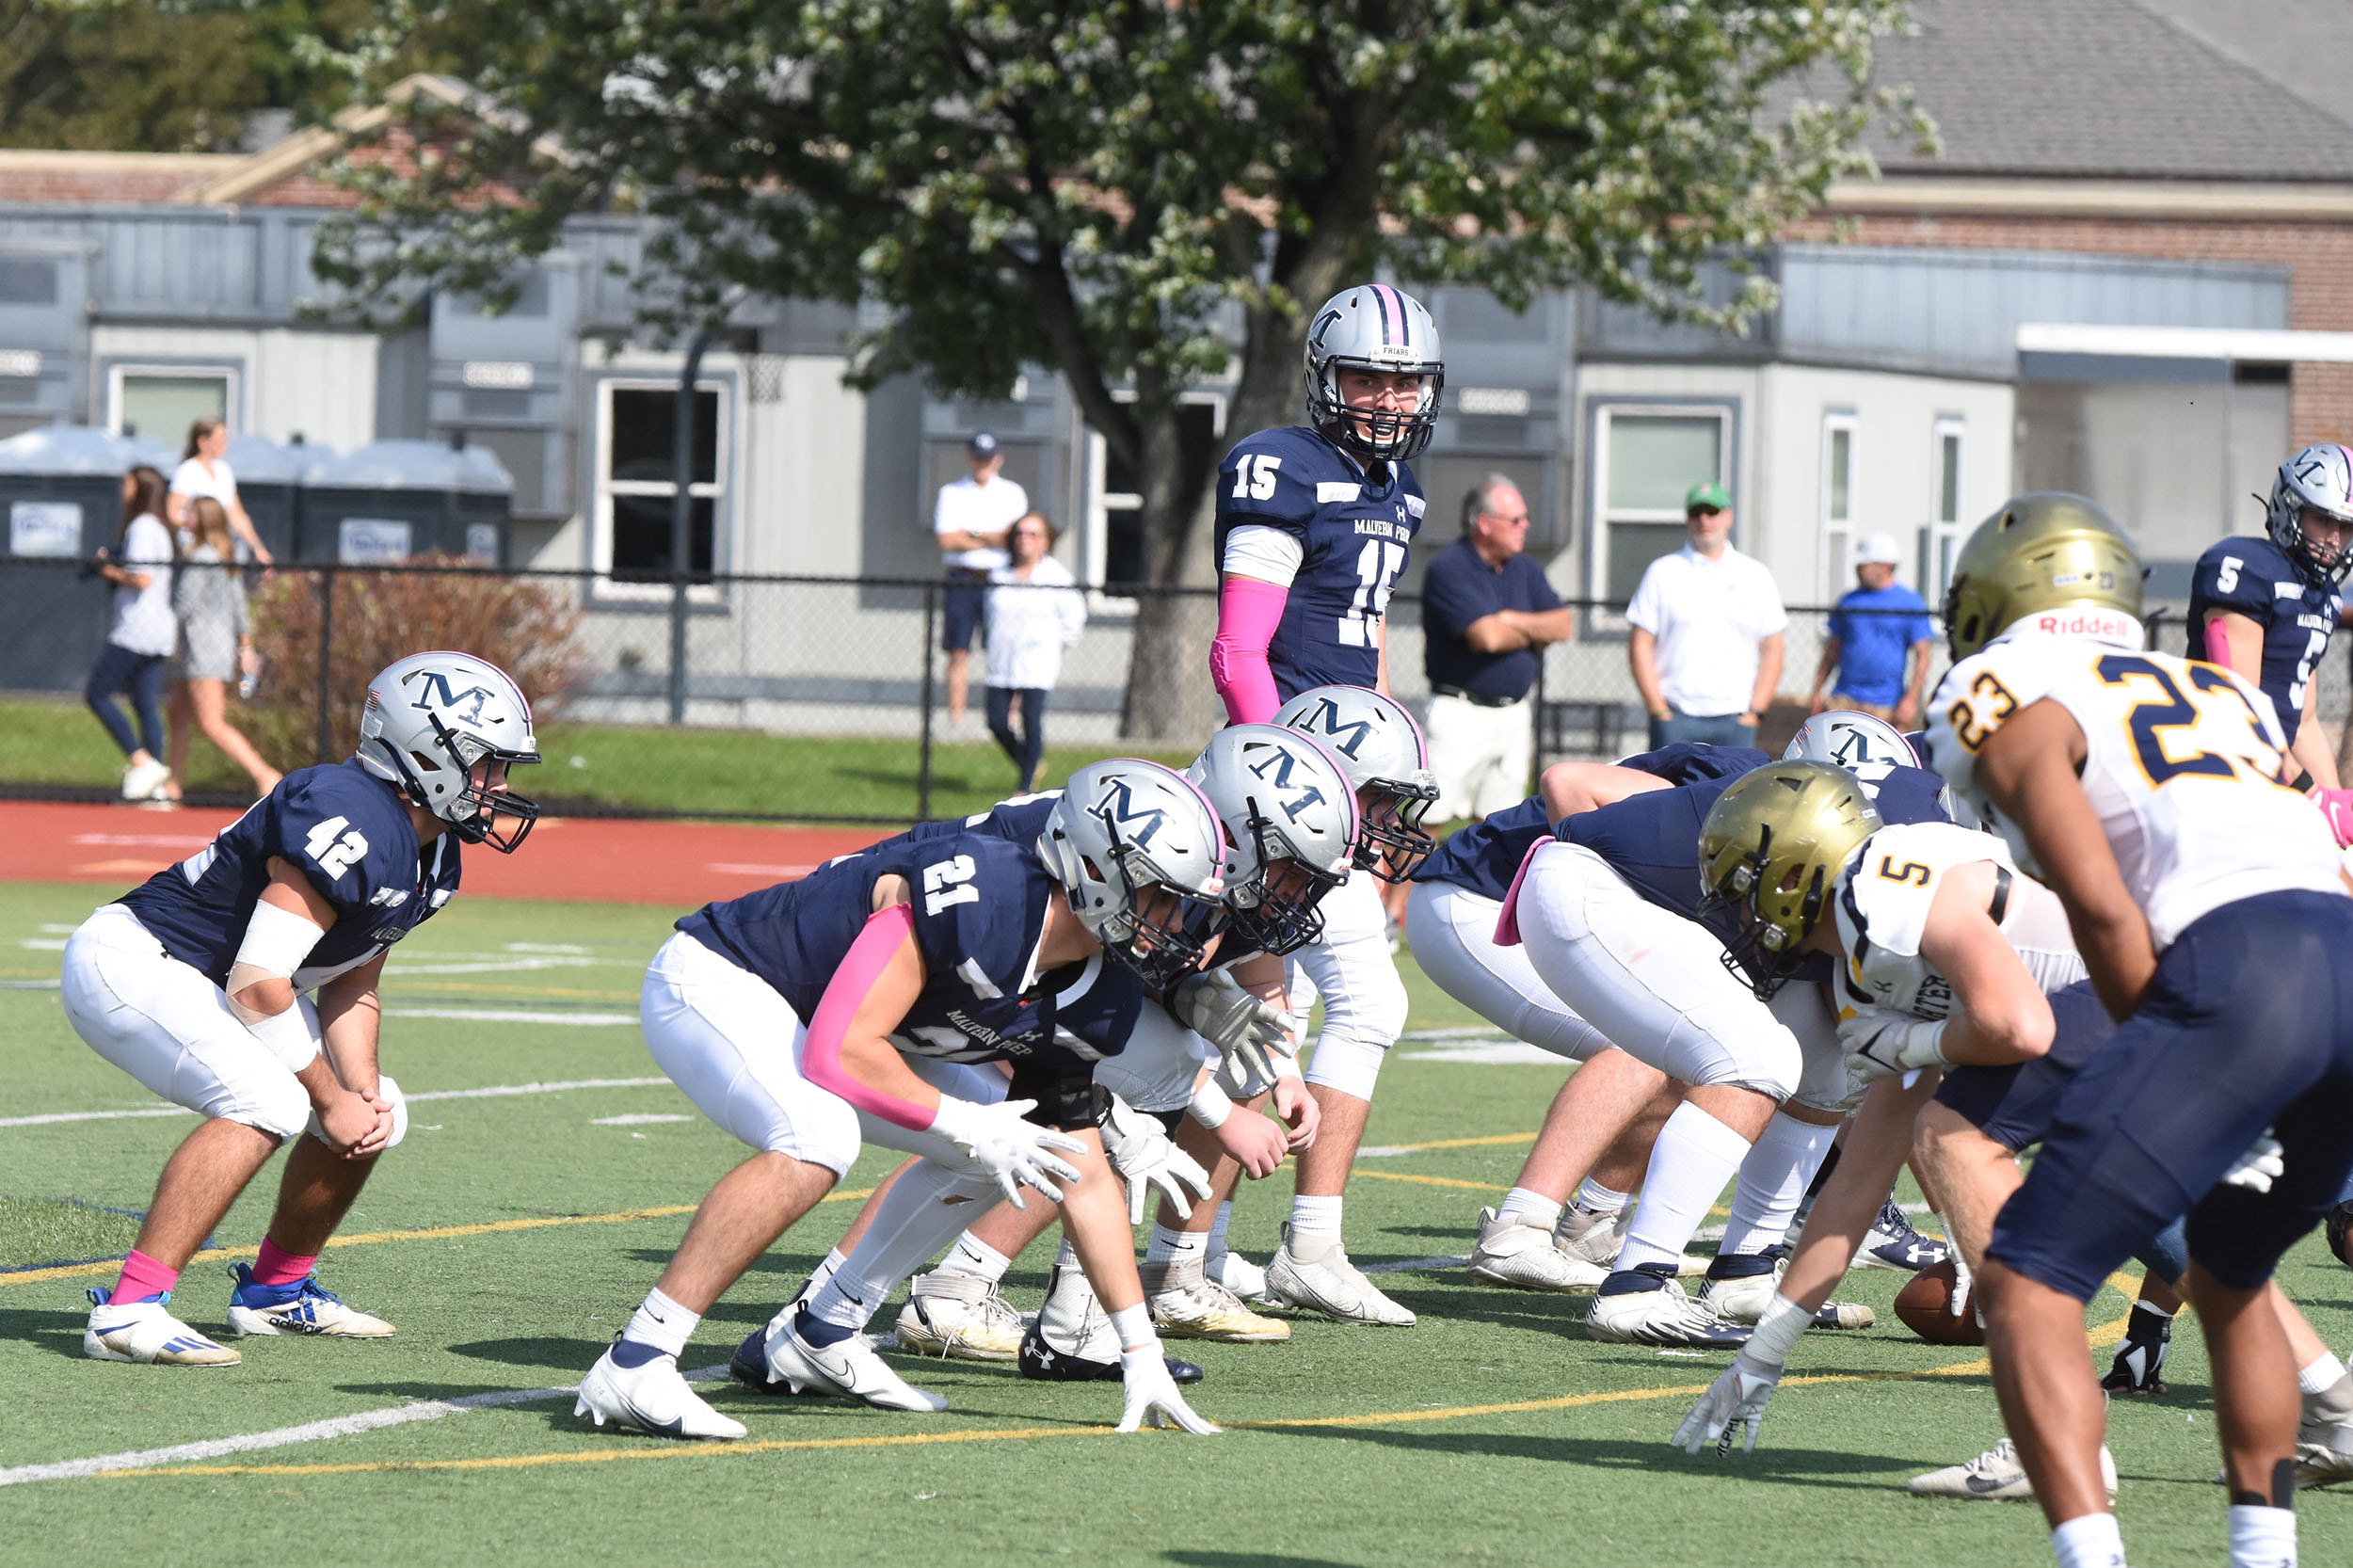 Malvern Prep vs West Caltholic- Going in for the TD!